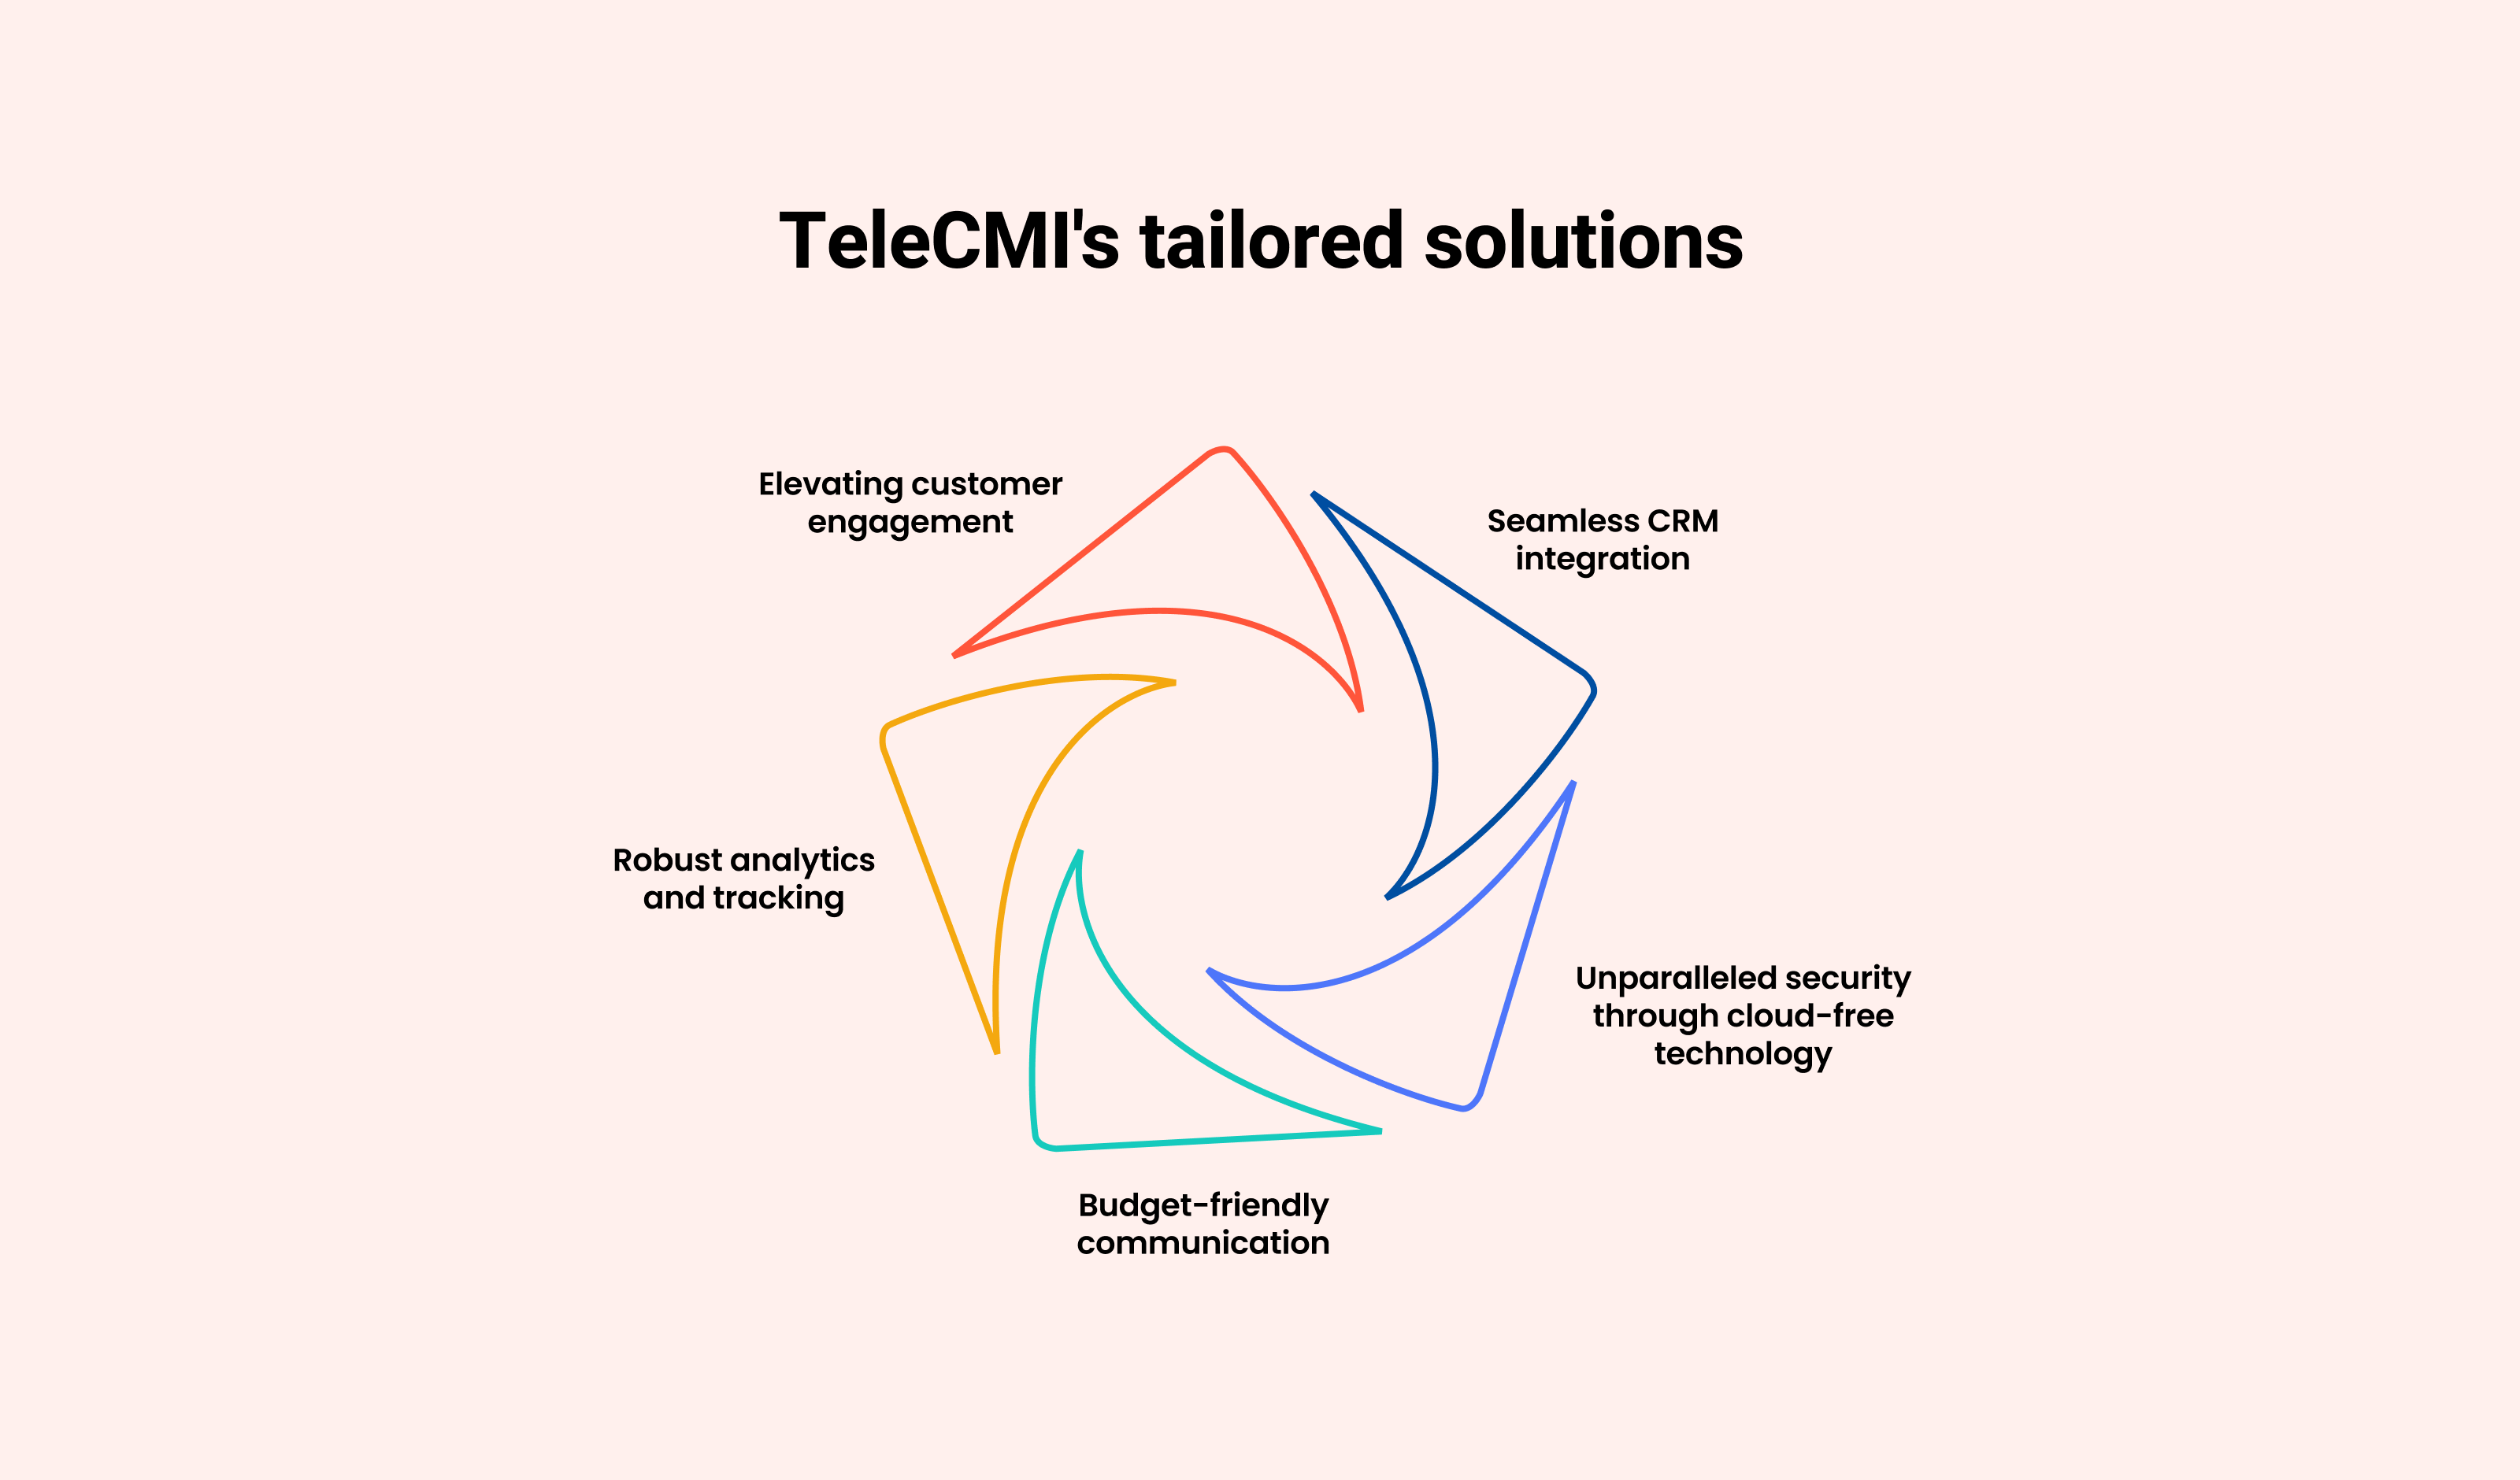 Addressing Pain Points with TeleCMI's Tailored Solutions: